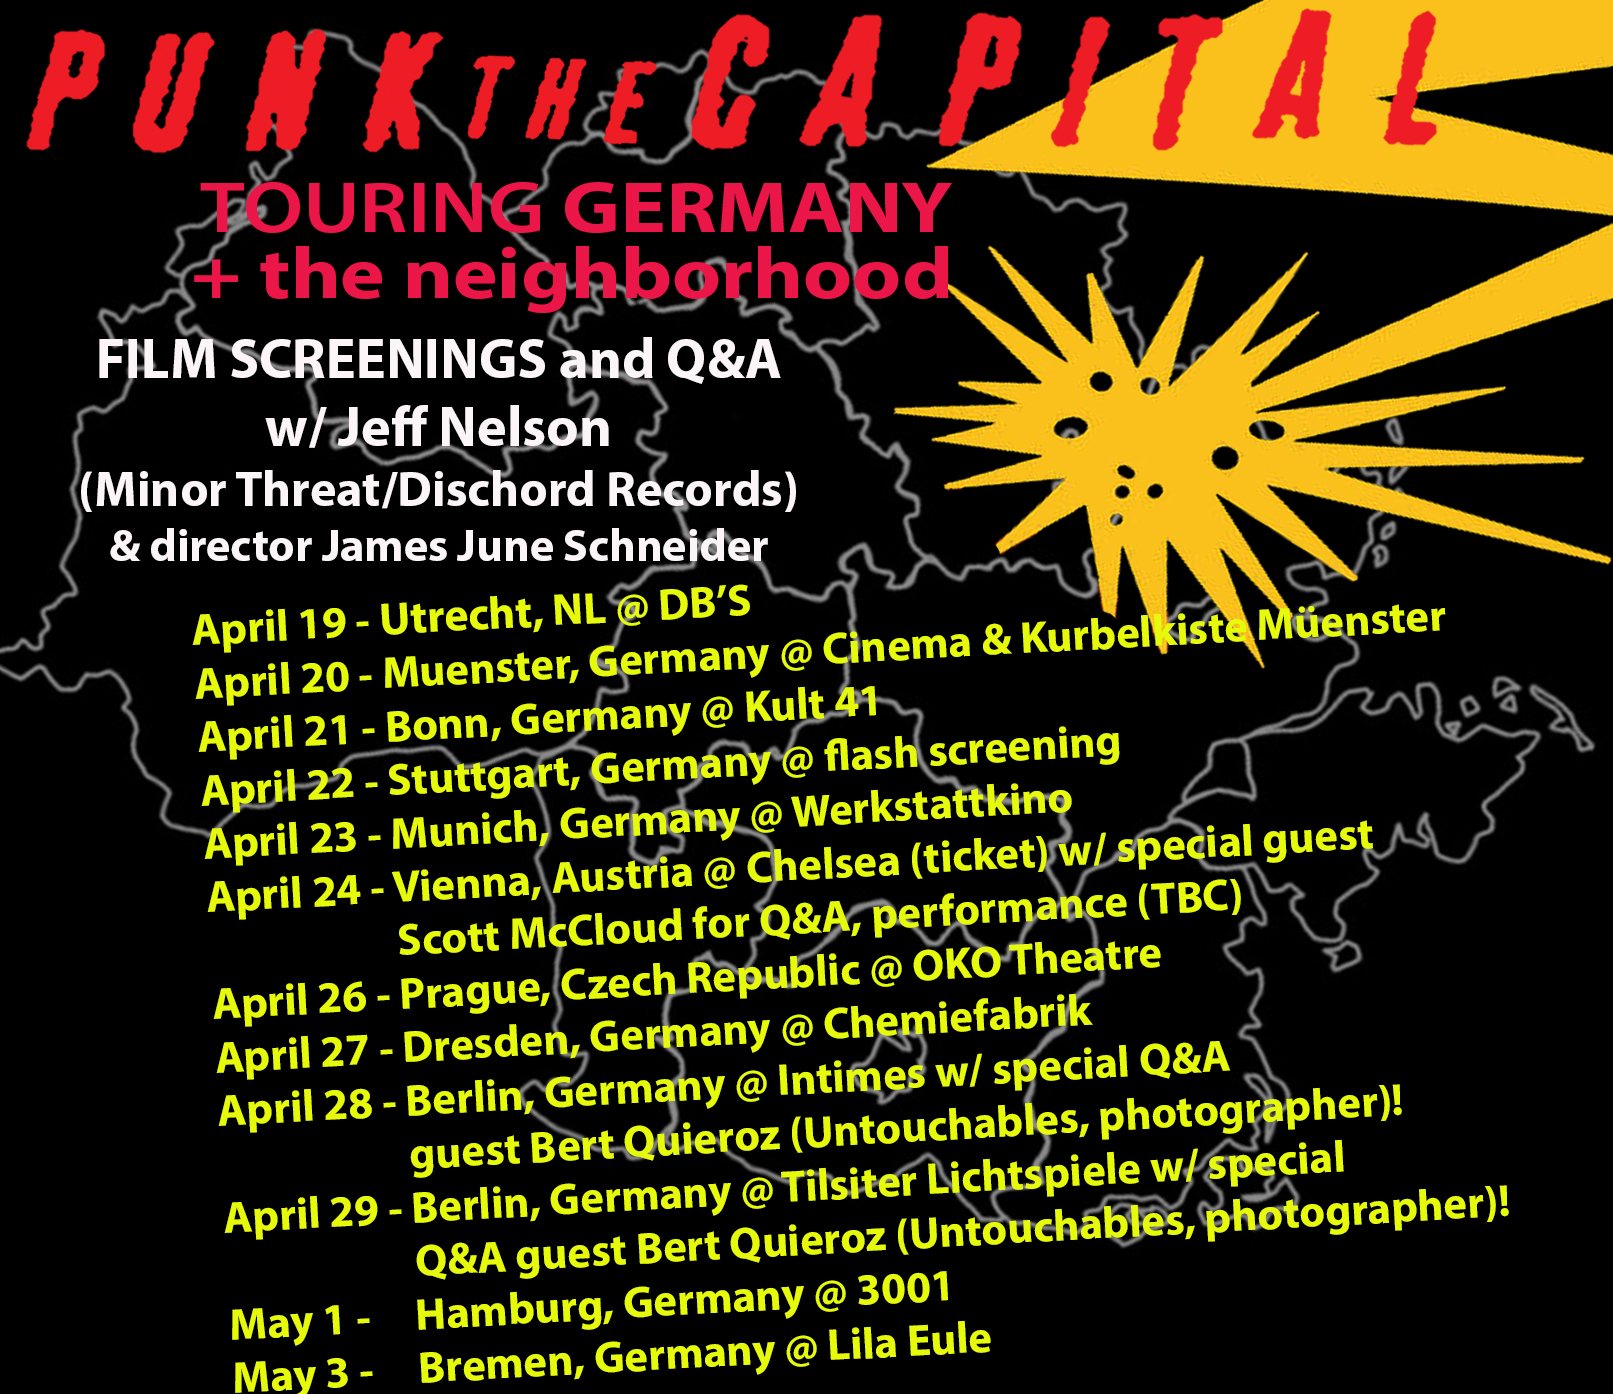 Interview with James June Schneider on his documentary Punk the Capital